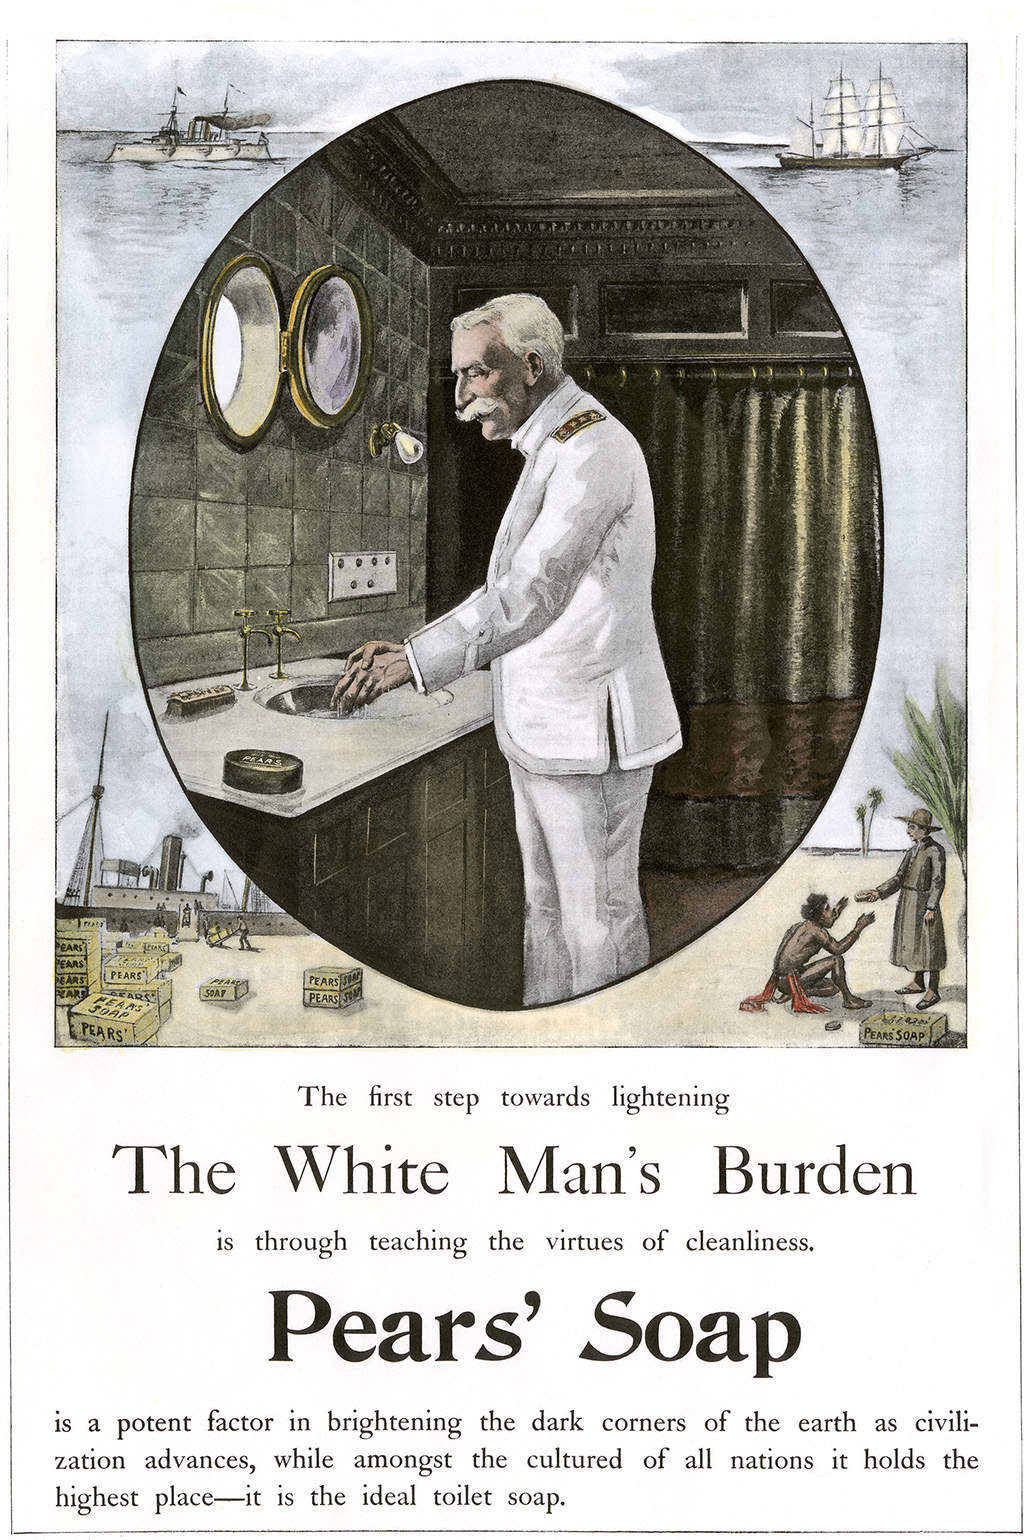 White Man s Burden is to teach cleanliness described in a Pears Soap advertisement 1890s